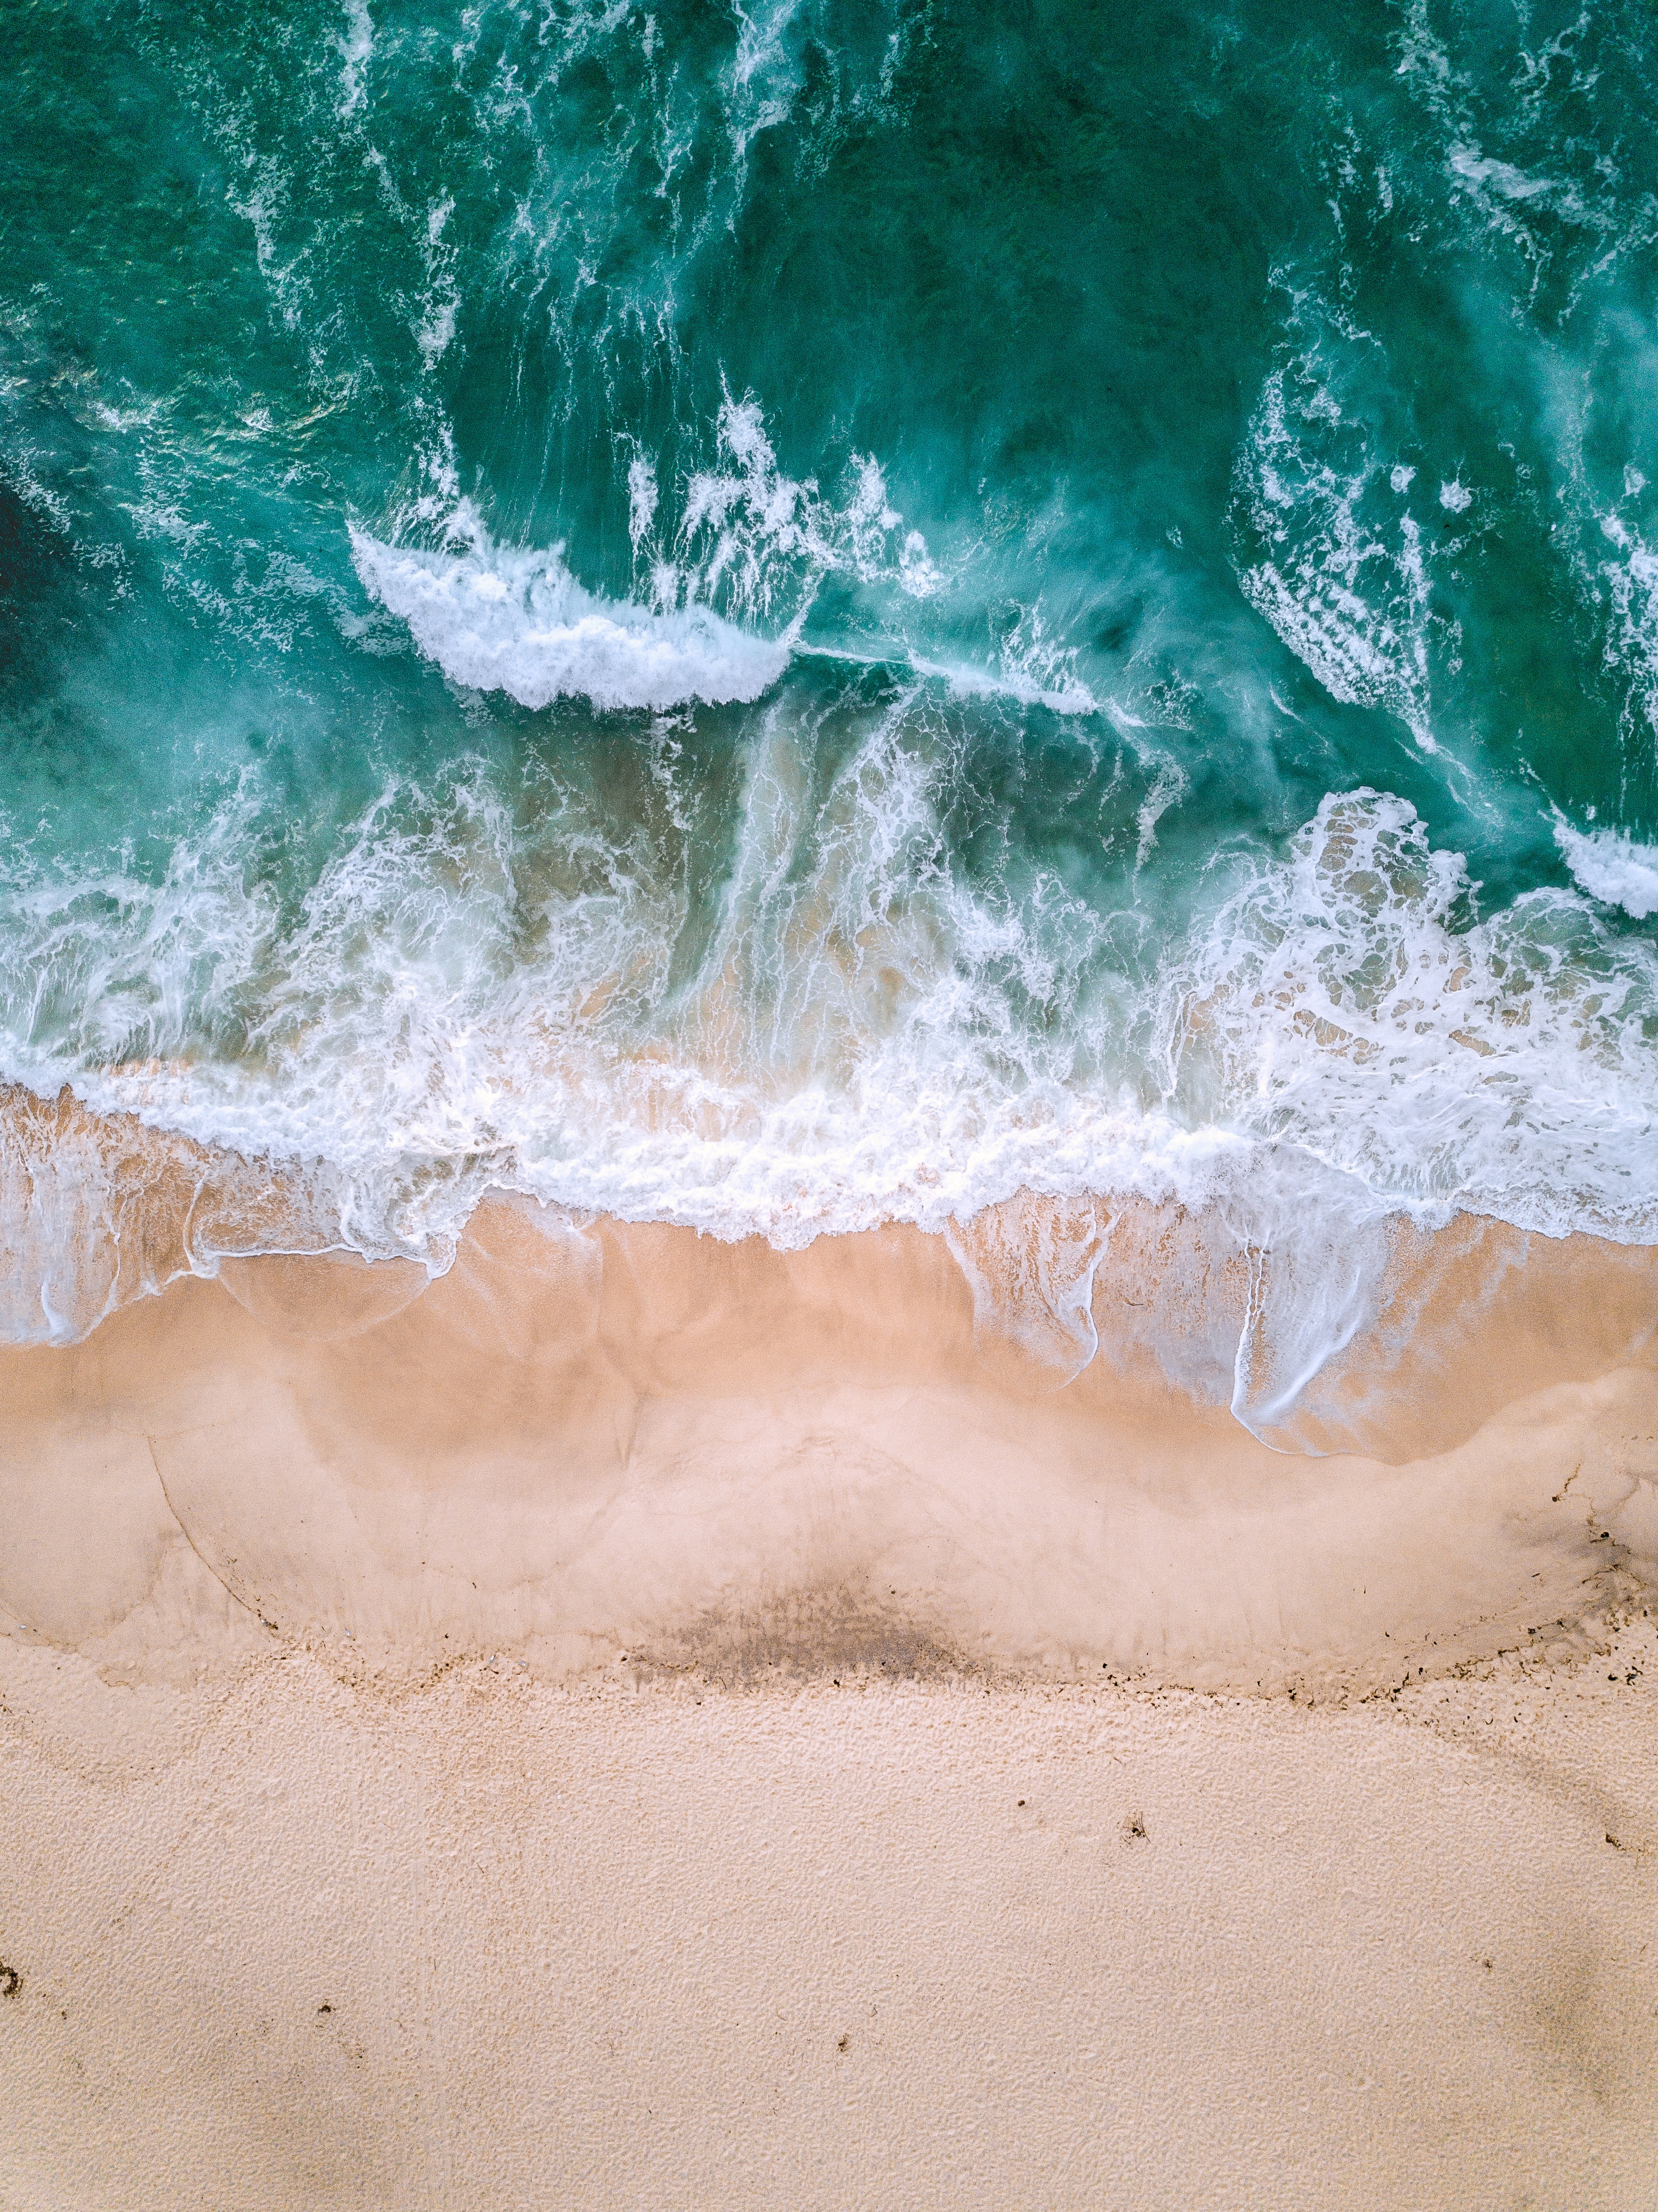 view from above, ocean, sand, nature, waves, foam, surf cellphone